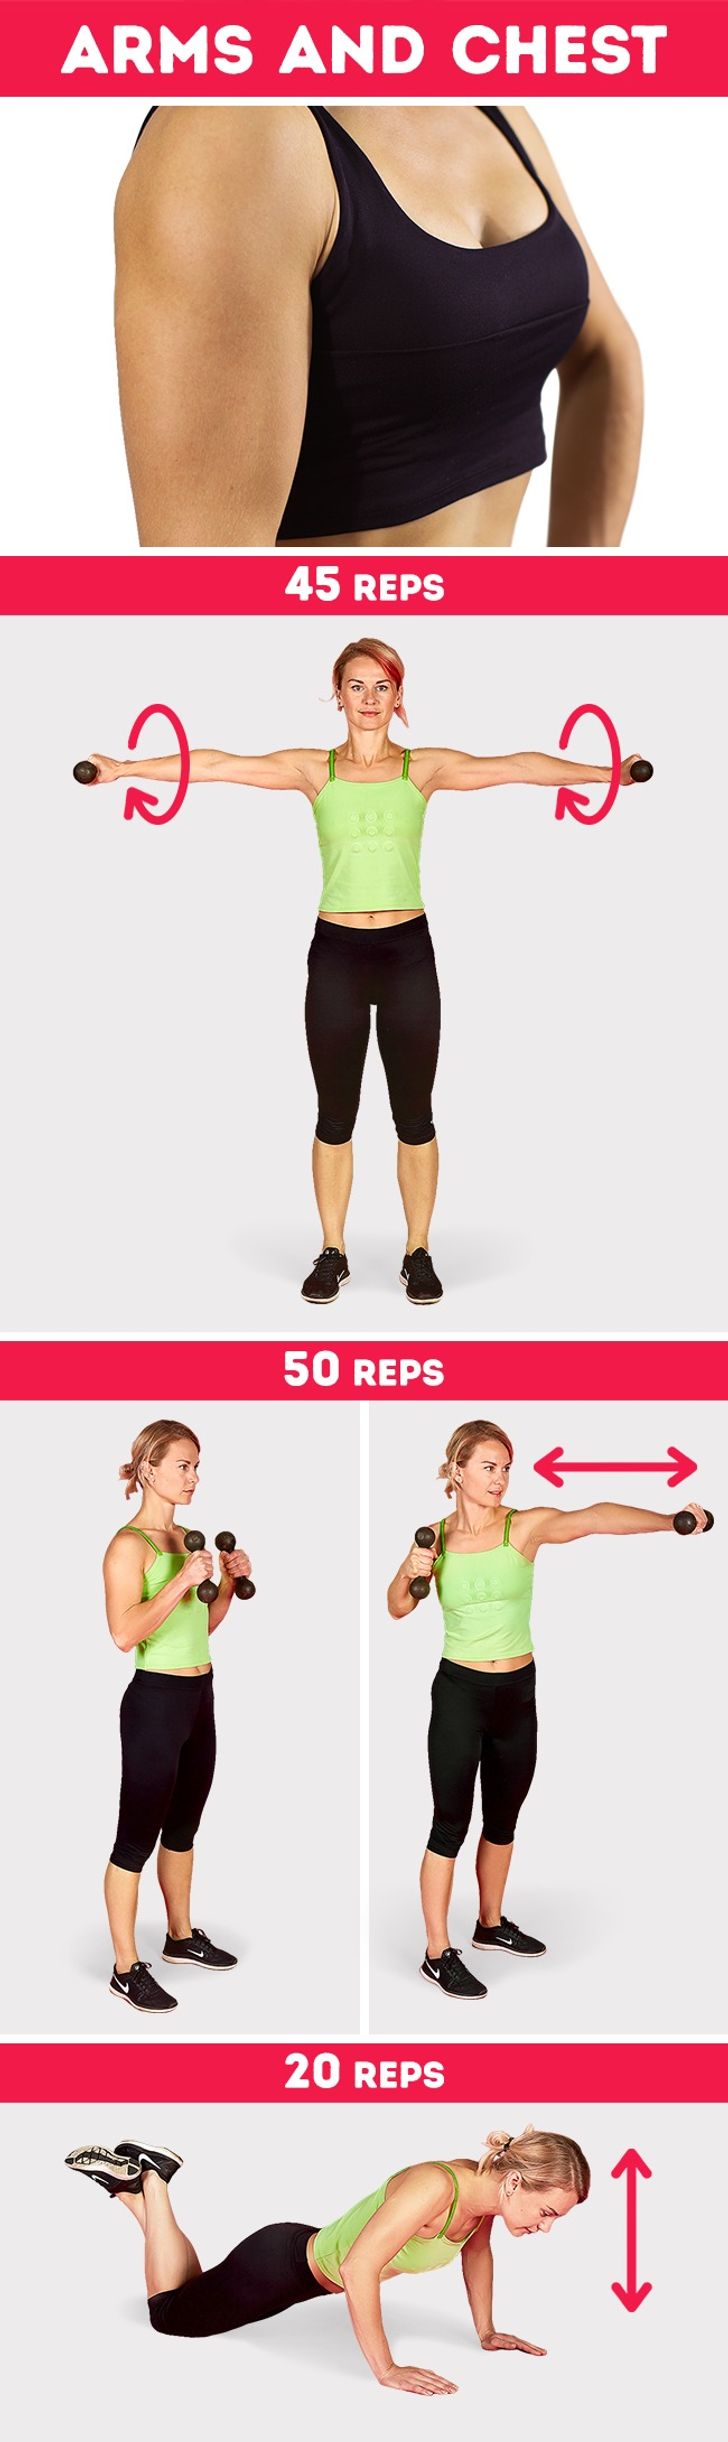 13 Effective Exercises to Tone Up and Lose Weight – HealthW